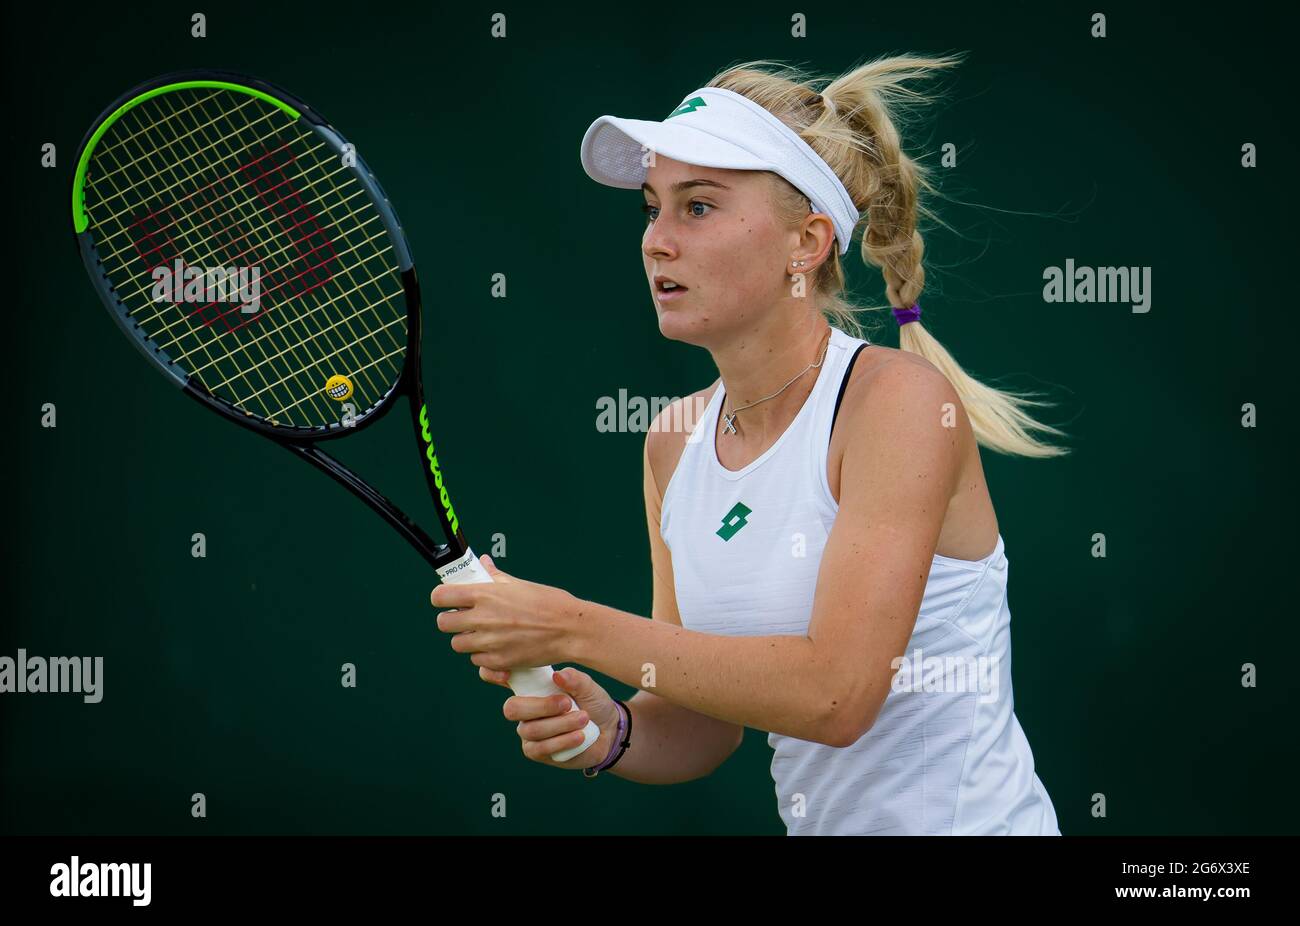 Polina Kudermetova of Russia in action during the Juniors competition at  The Championships Wimbledon 2021, Grand Slam tennis tournament on July 8,  2021 at All England Lawn Tennis and Croquet Club in